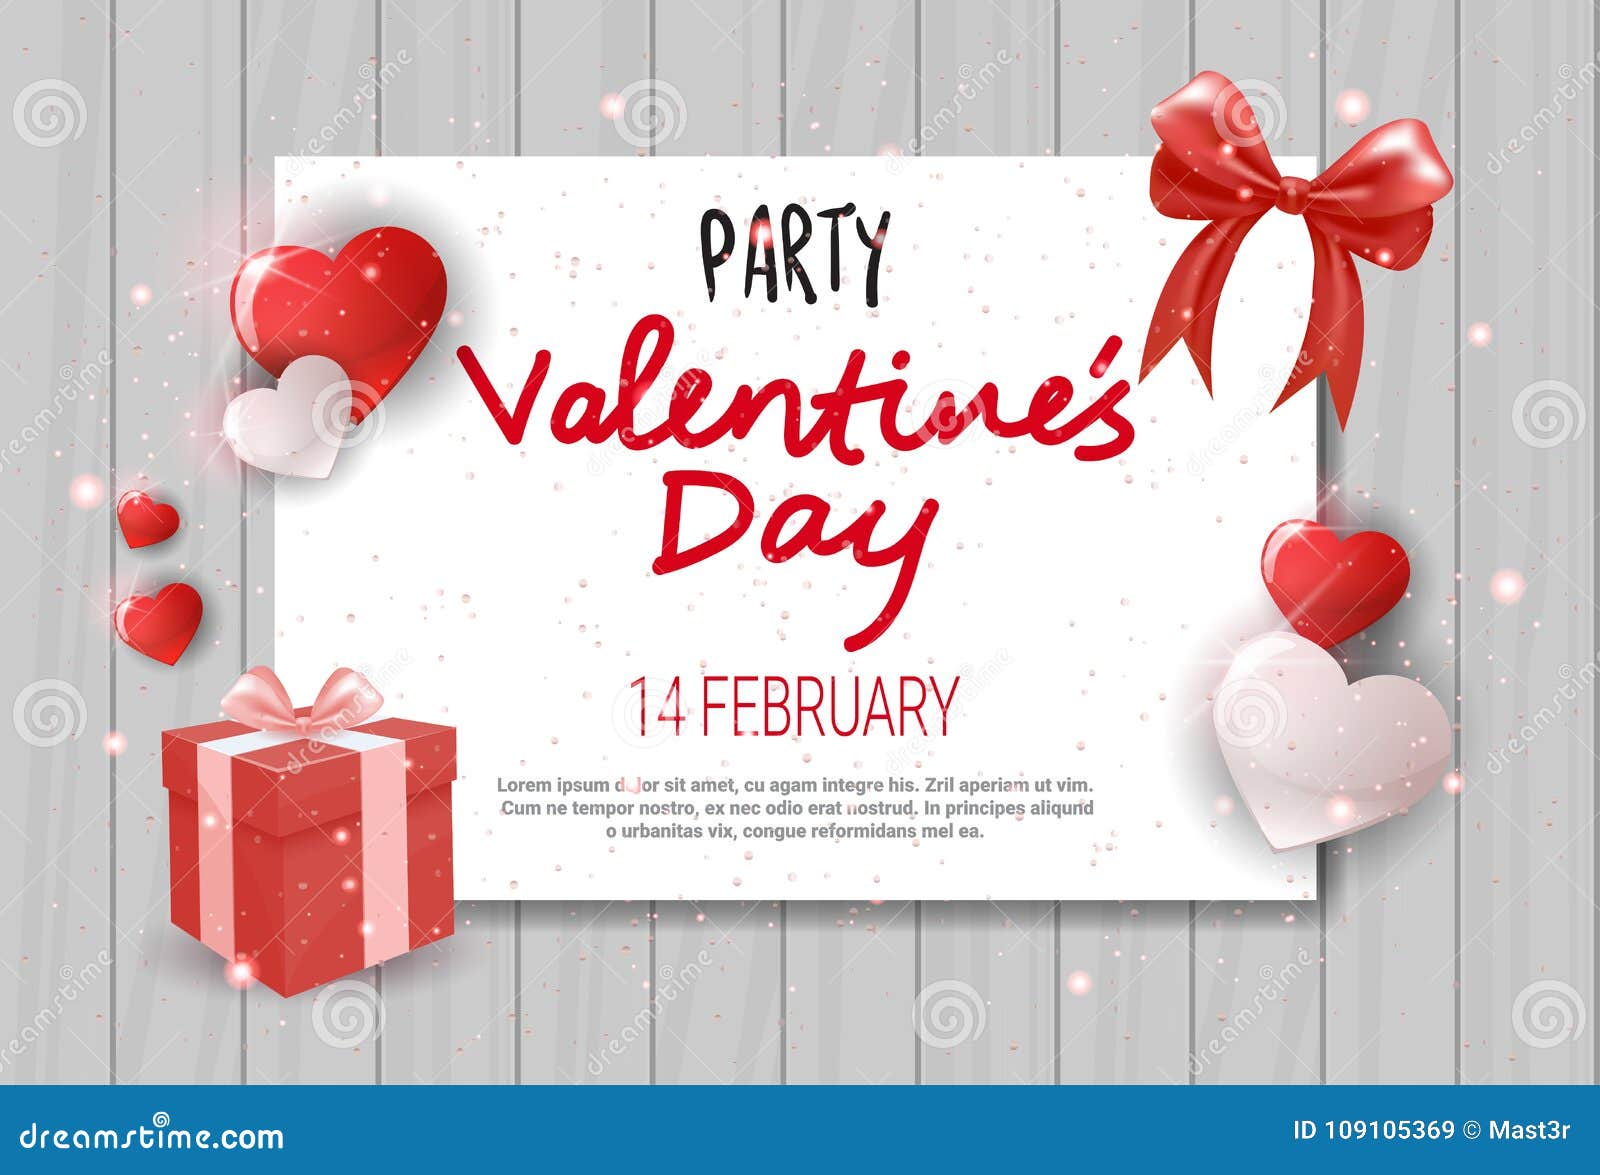 Valentines Day Flyer Greeting Card Party Invitation Template Pertaining To Valentines Day Flyer Template Free